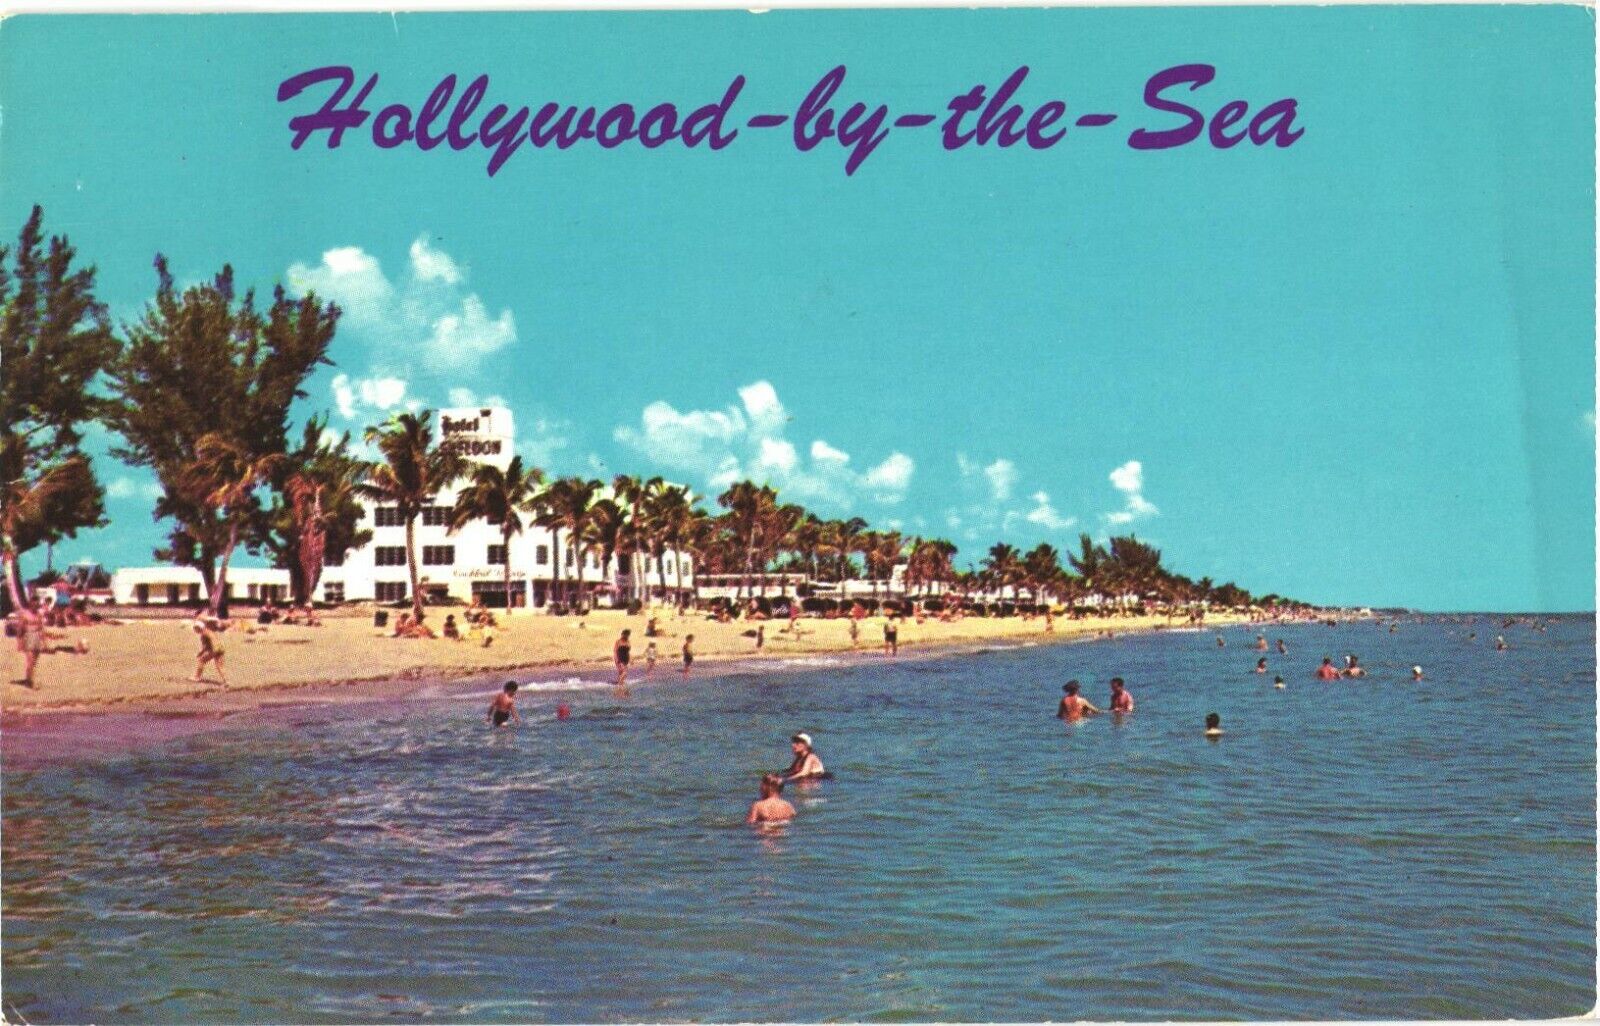 Beach-goers Swimming At The Beautiful Hollywood-By-The Sea In Florida Postcard